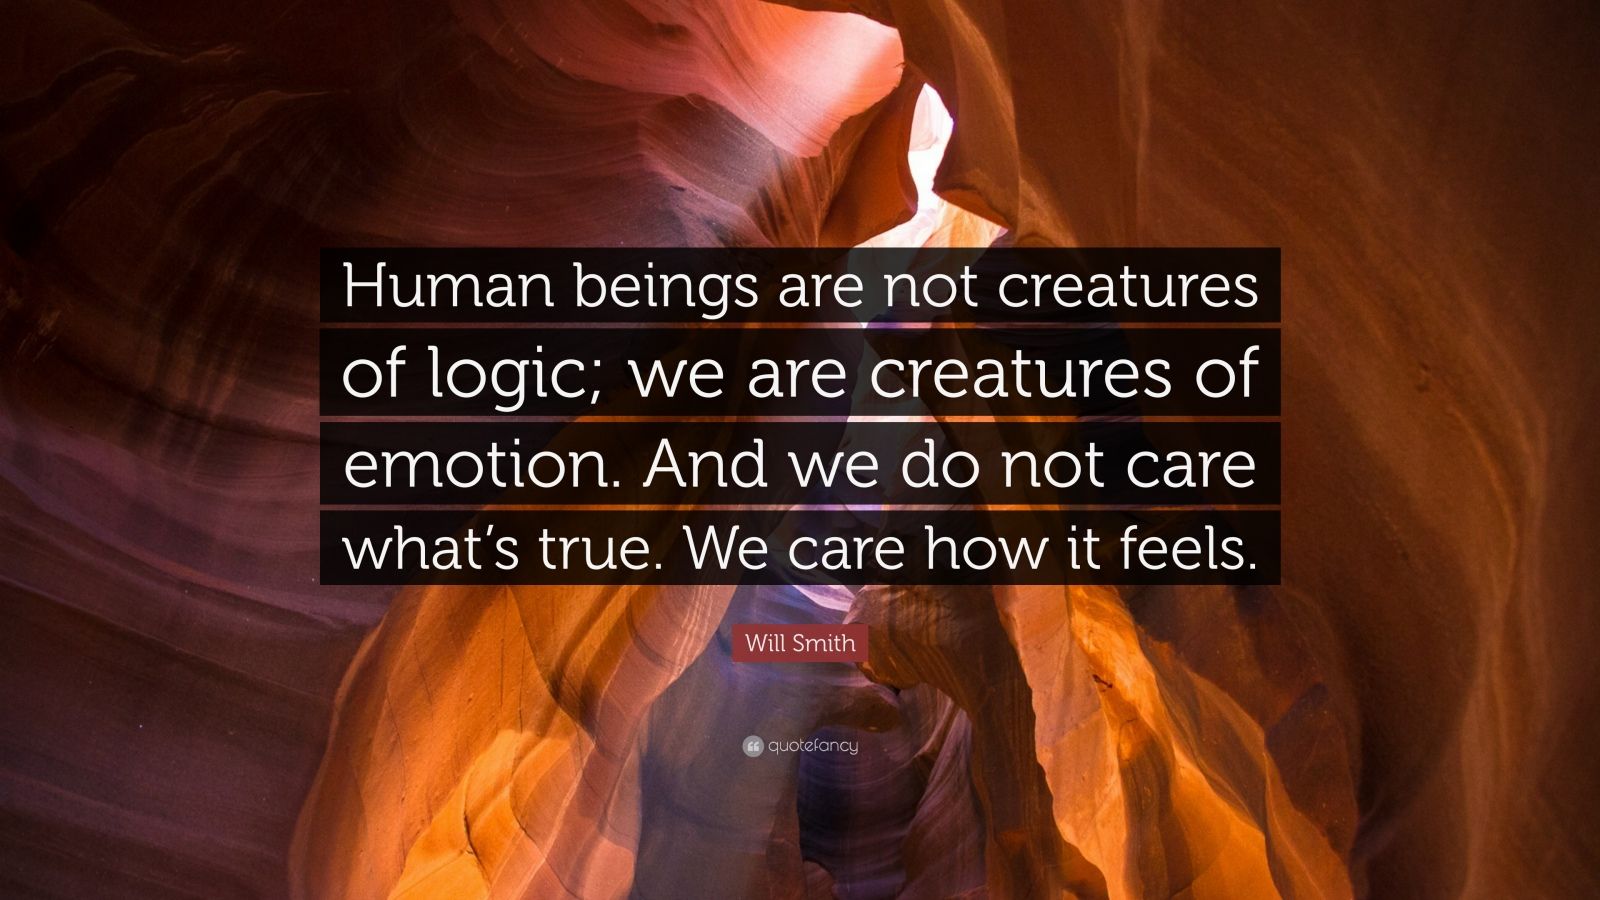 we are not human beings qoute